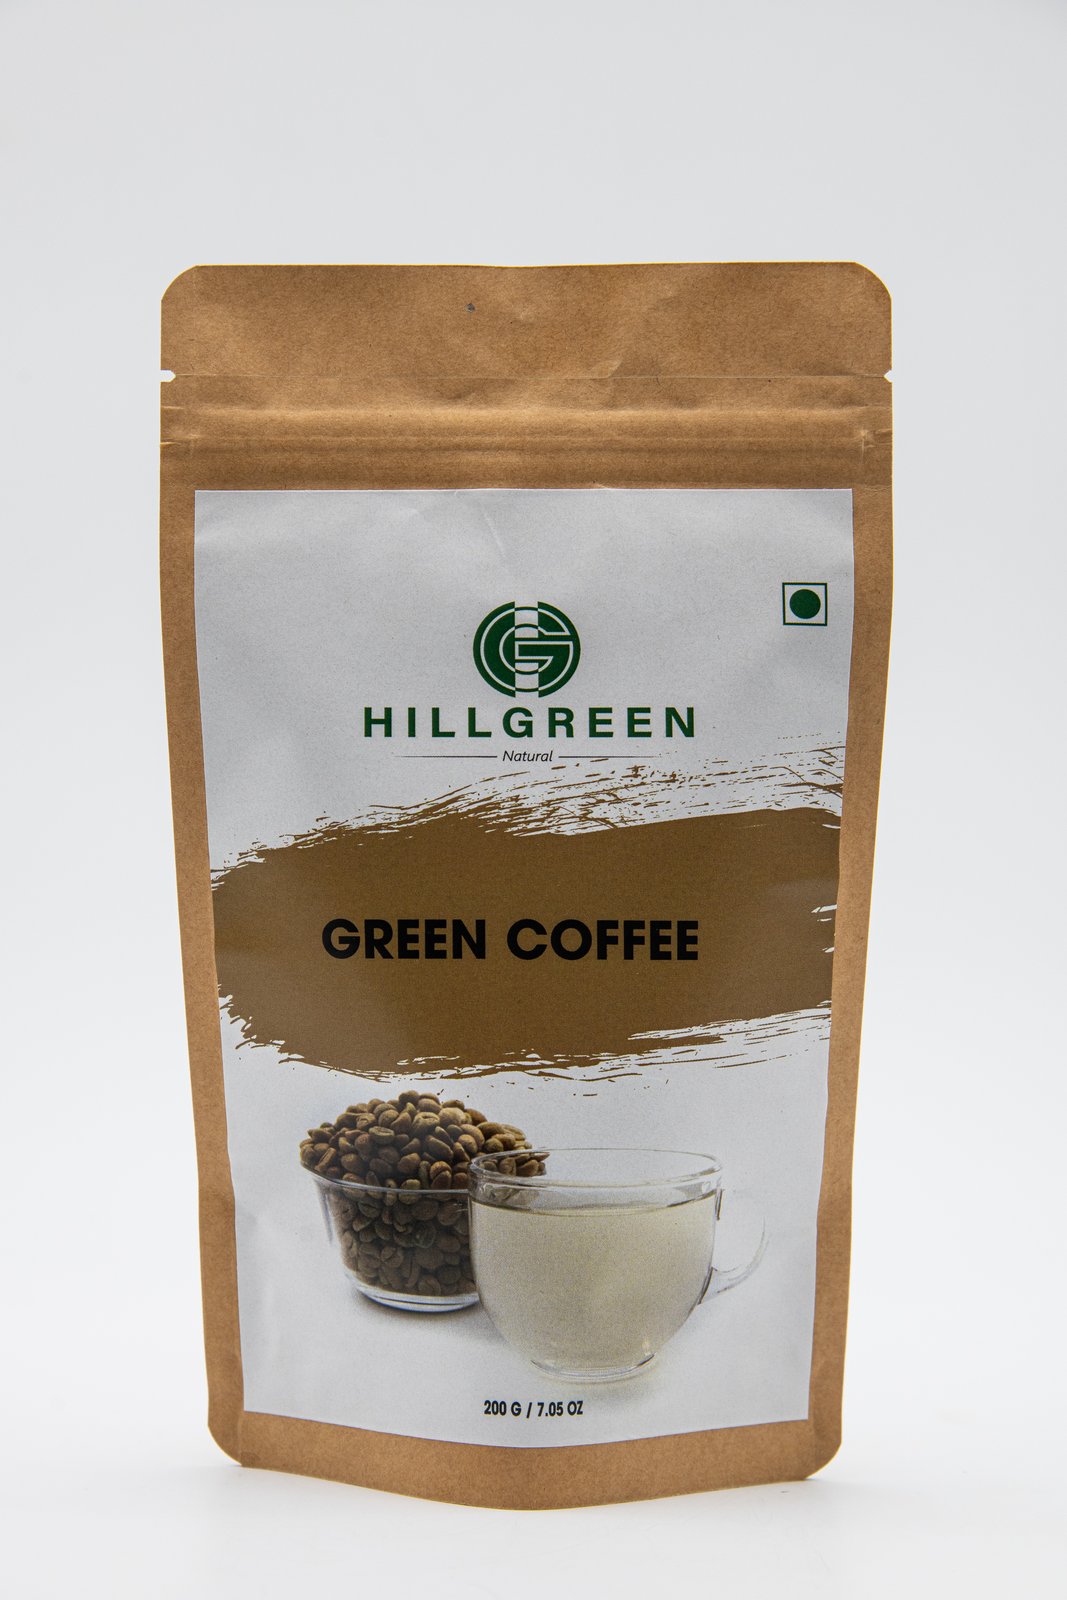 Product: Hillgreen Natural, Green Coffee, 200g